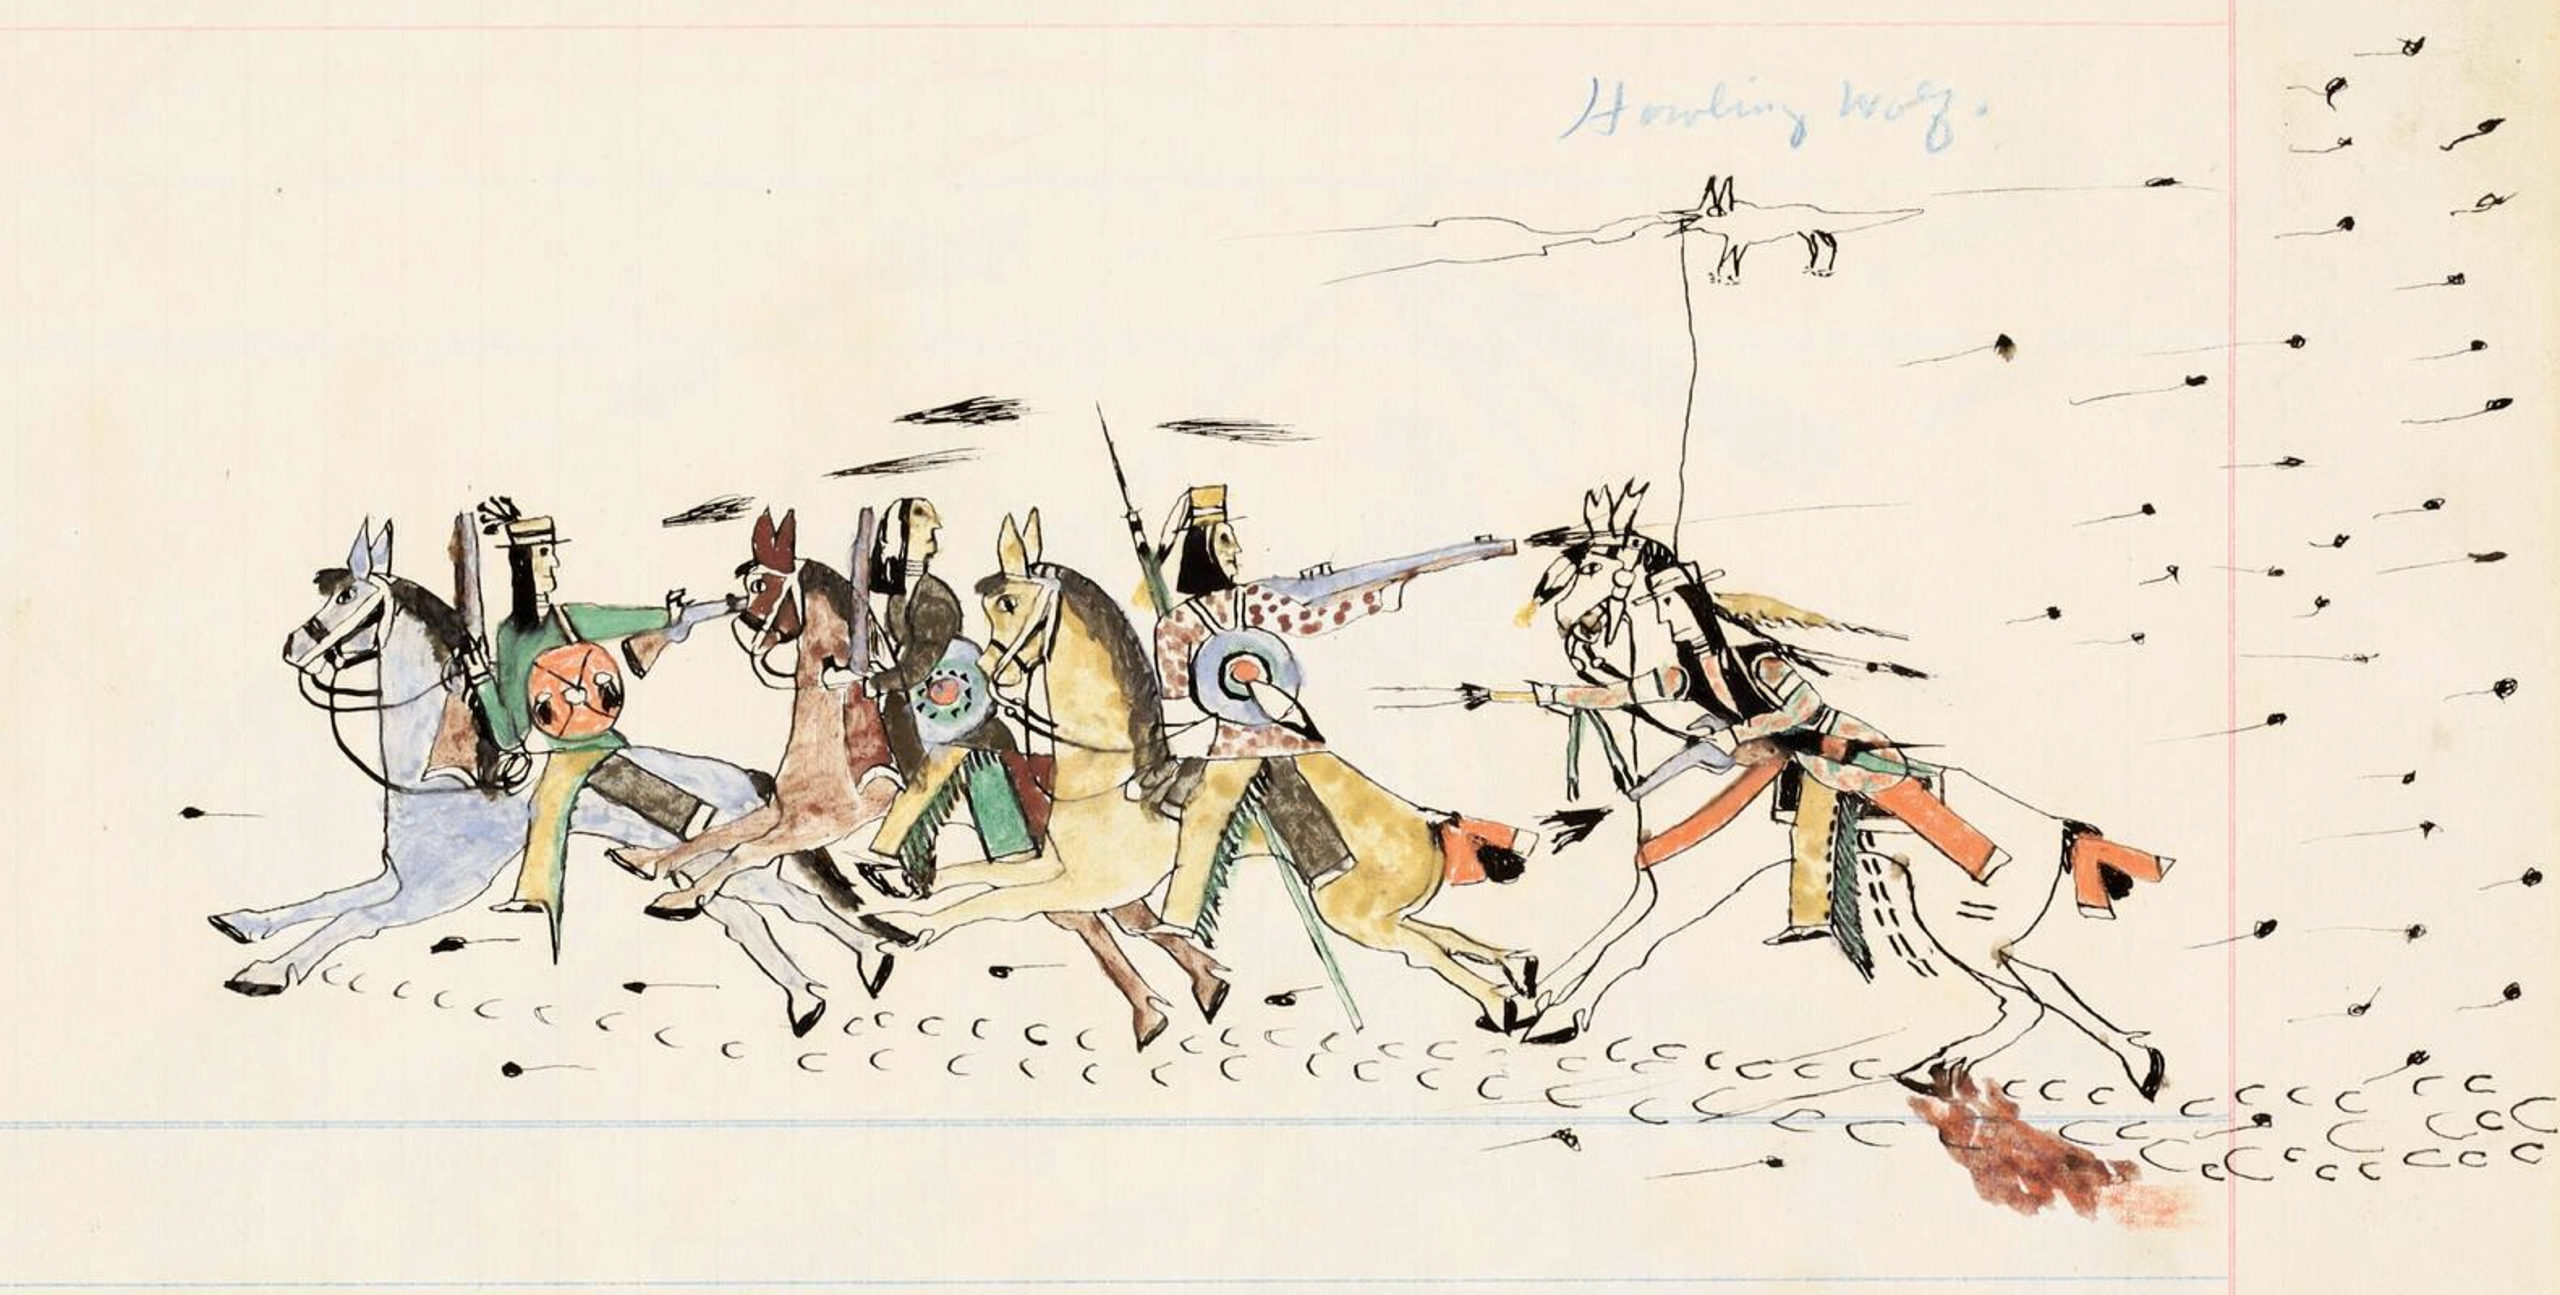 Ho-na-nist-to (Howling Wolf), Southern Tsétsêhéstâhese/Só'taeo'o (Cheyenne), <em>At Sand Creek Massacre (1864)</em> (detail), c. 1874–75, pen, ink, and watercolor on ledger paper, 20 x 31.5 cm (<a href="https://allenartcollection.oberlin.edu/objects/11427/22-pawnees-21-blank-page-3-blank-page-4-at-the?ctx=9a2dbf77ef6701f4a4f0392999305ce97342be9c&amp;idx=4" target="_blank" rel="noopener">Allen Memorial Art Museum</a>, Oberlin College)